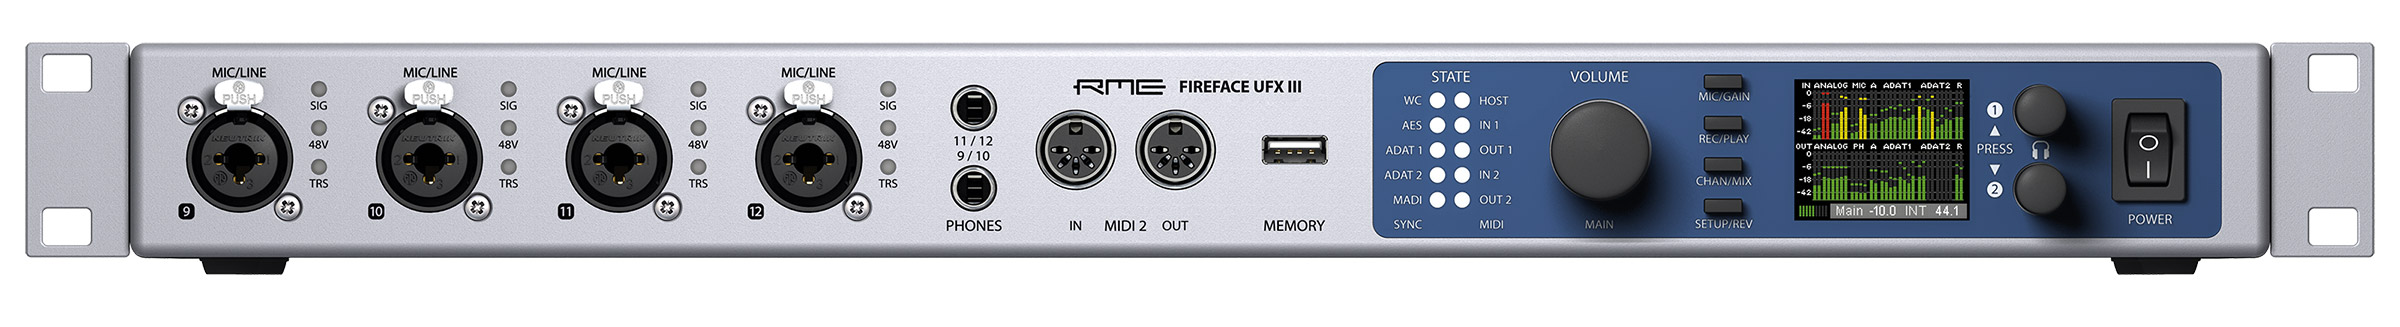 RME Fireface UFX III audio interface front panel